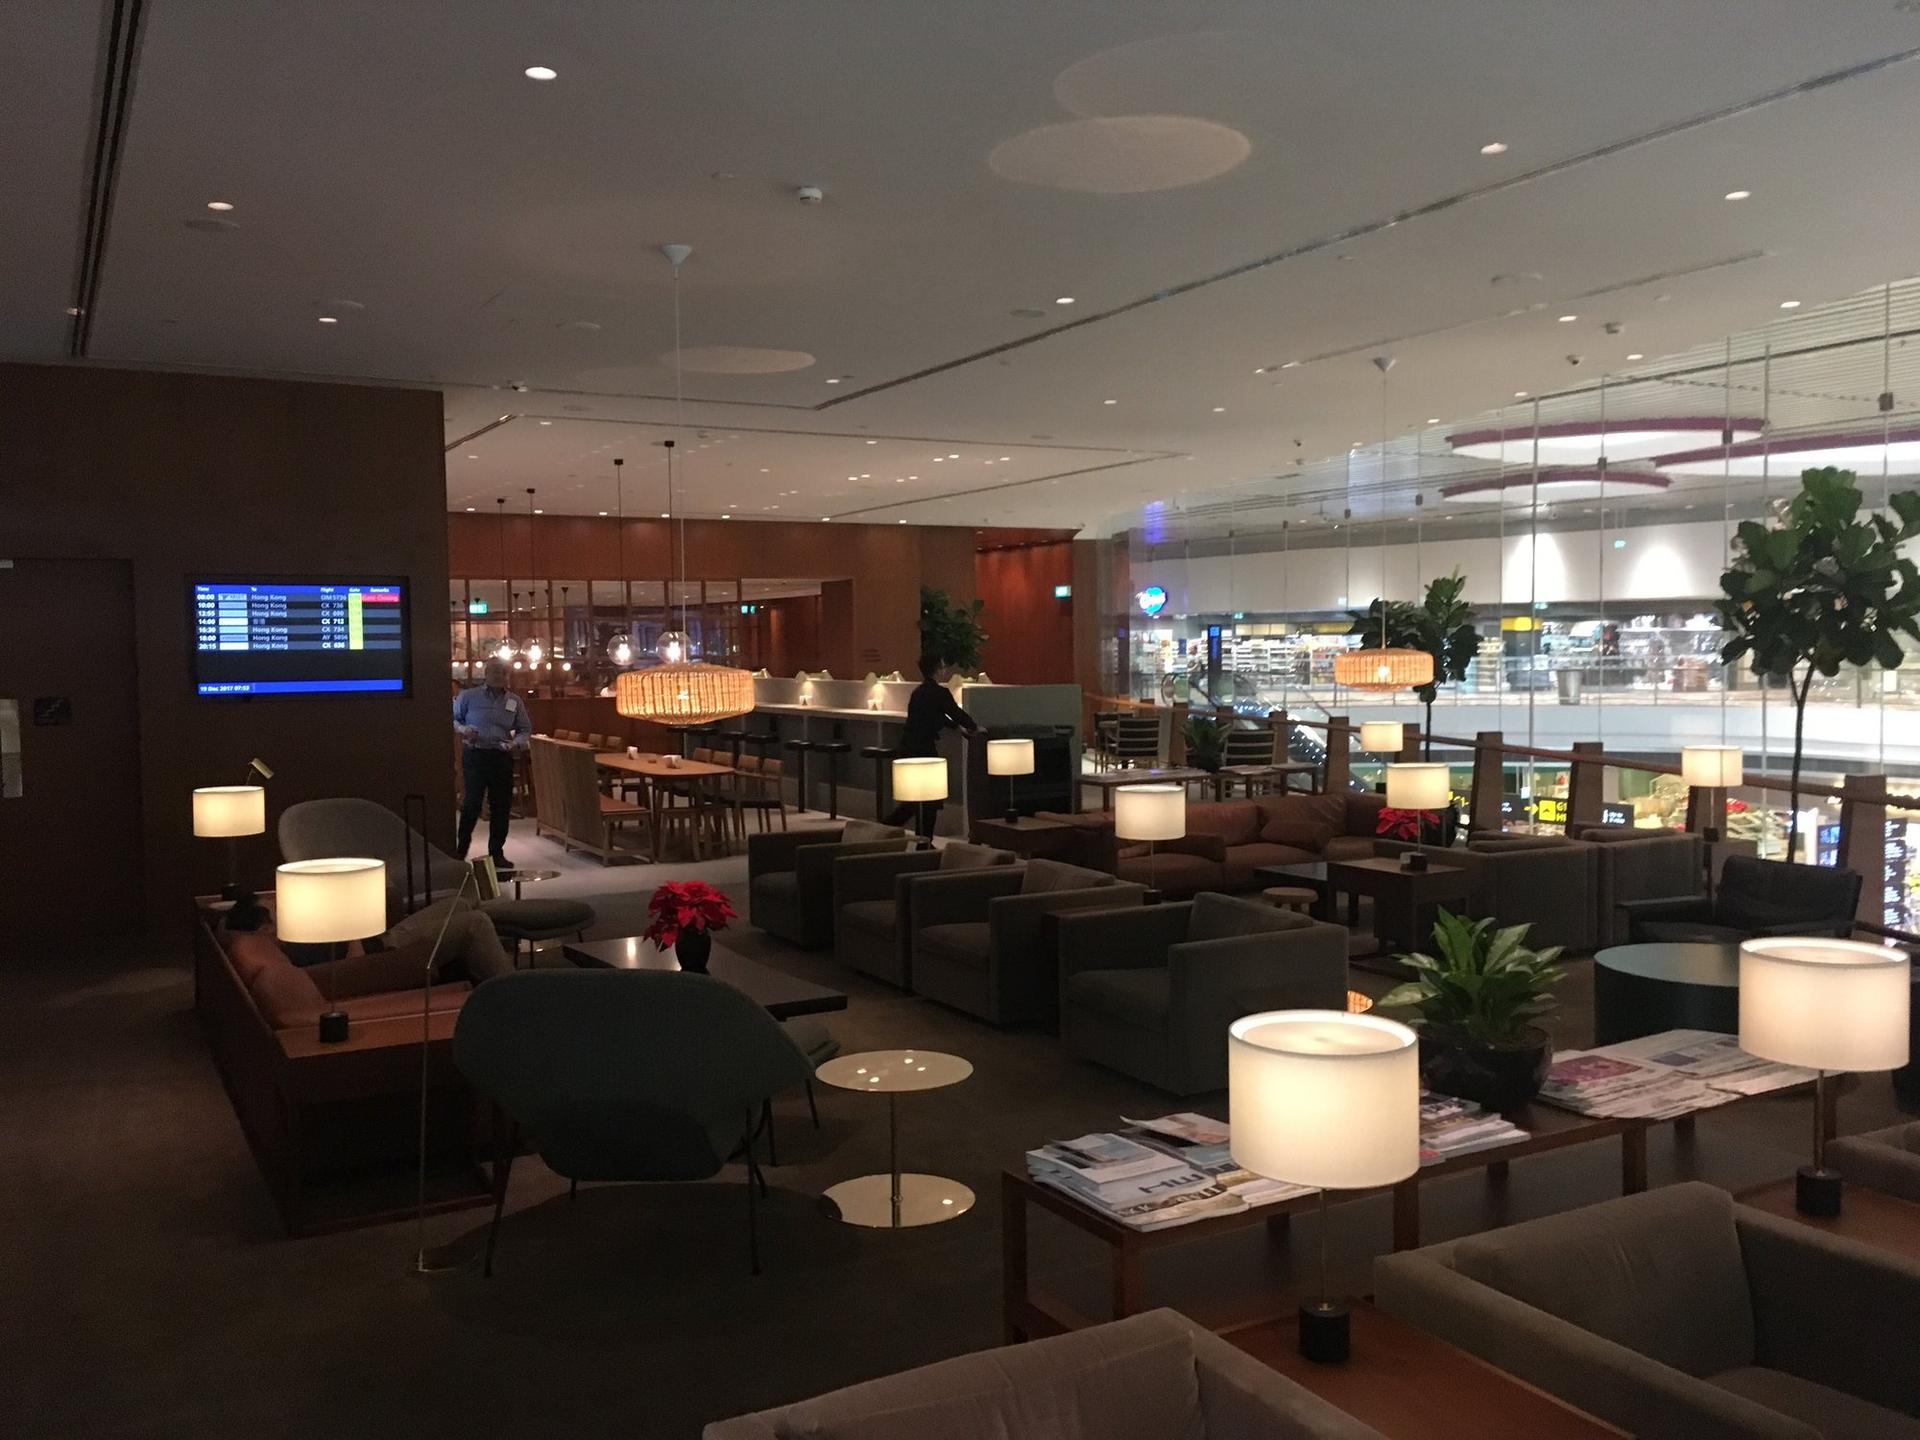 Cathay Pacific Lounge image 50 of 60